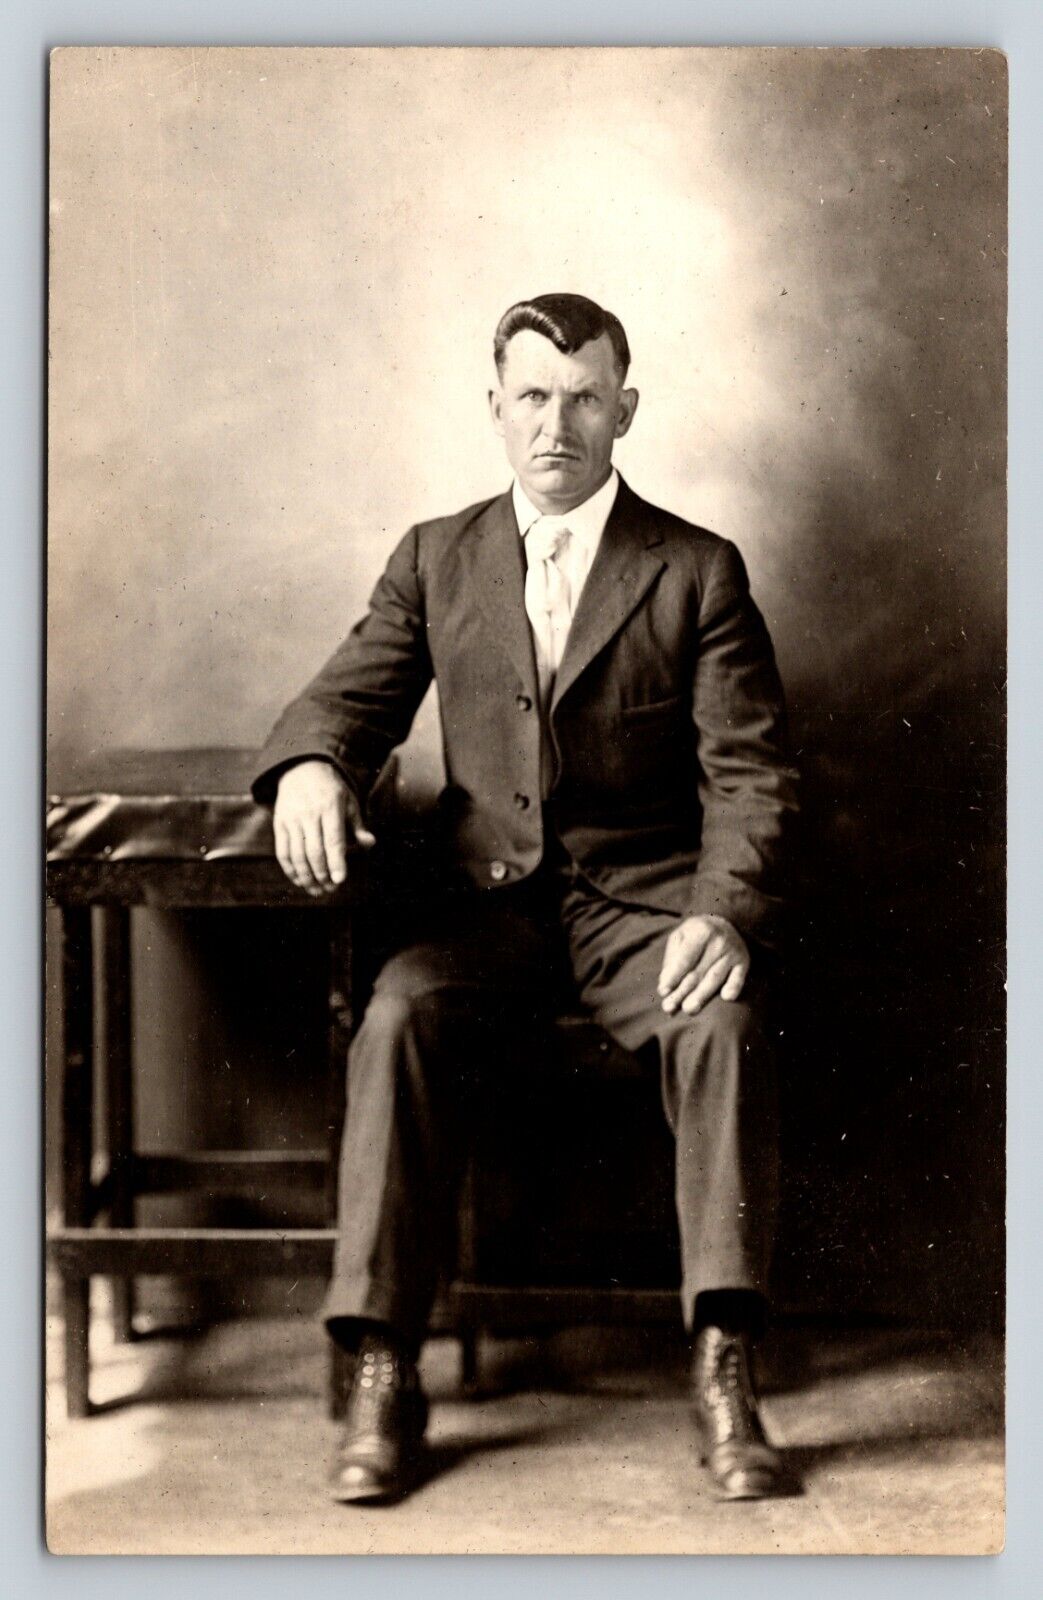 RPPC Serious Man In Suit w/ Classic Haircut Style VINTAGE Postcard AZO 1918-1930